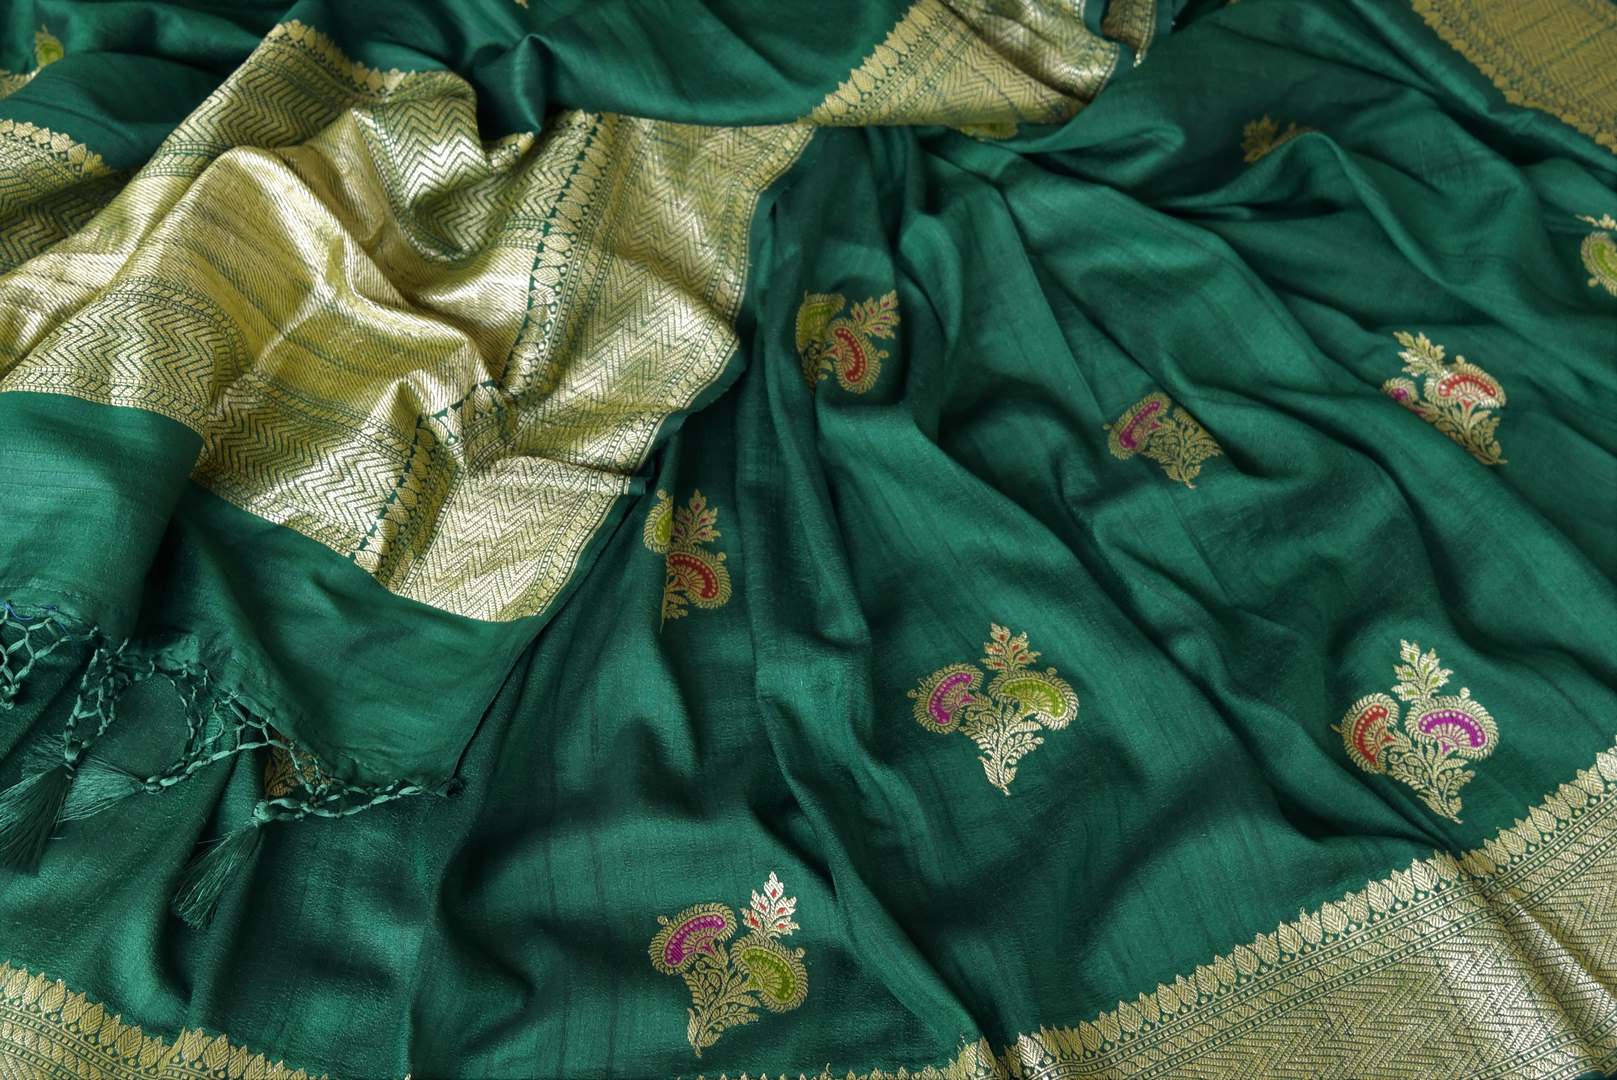 Buy bottle green khaddi Banarasi saree online in USA with minakari zari floral buta. Feel traditional on special occasions in beautiful Indian designer saris from Pure Elegance Indian fashion store in USA. Choose from a splendid variety of Banarasi sarees, pure handwoven saris. Buy online.-details